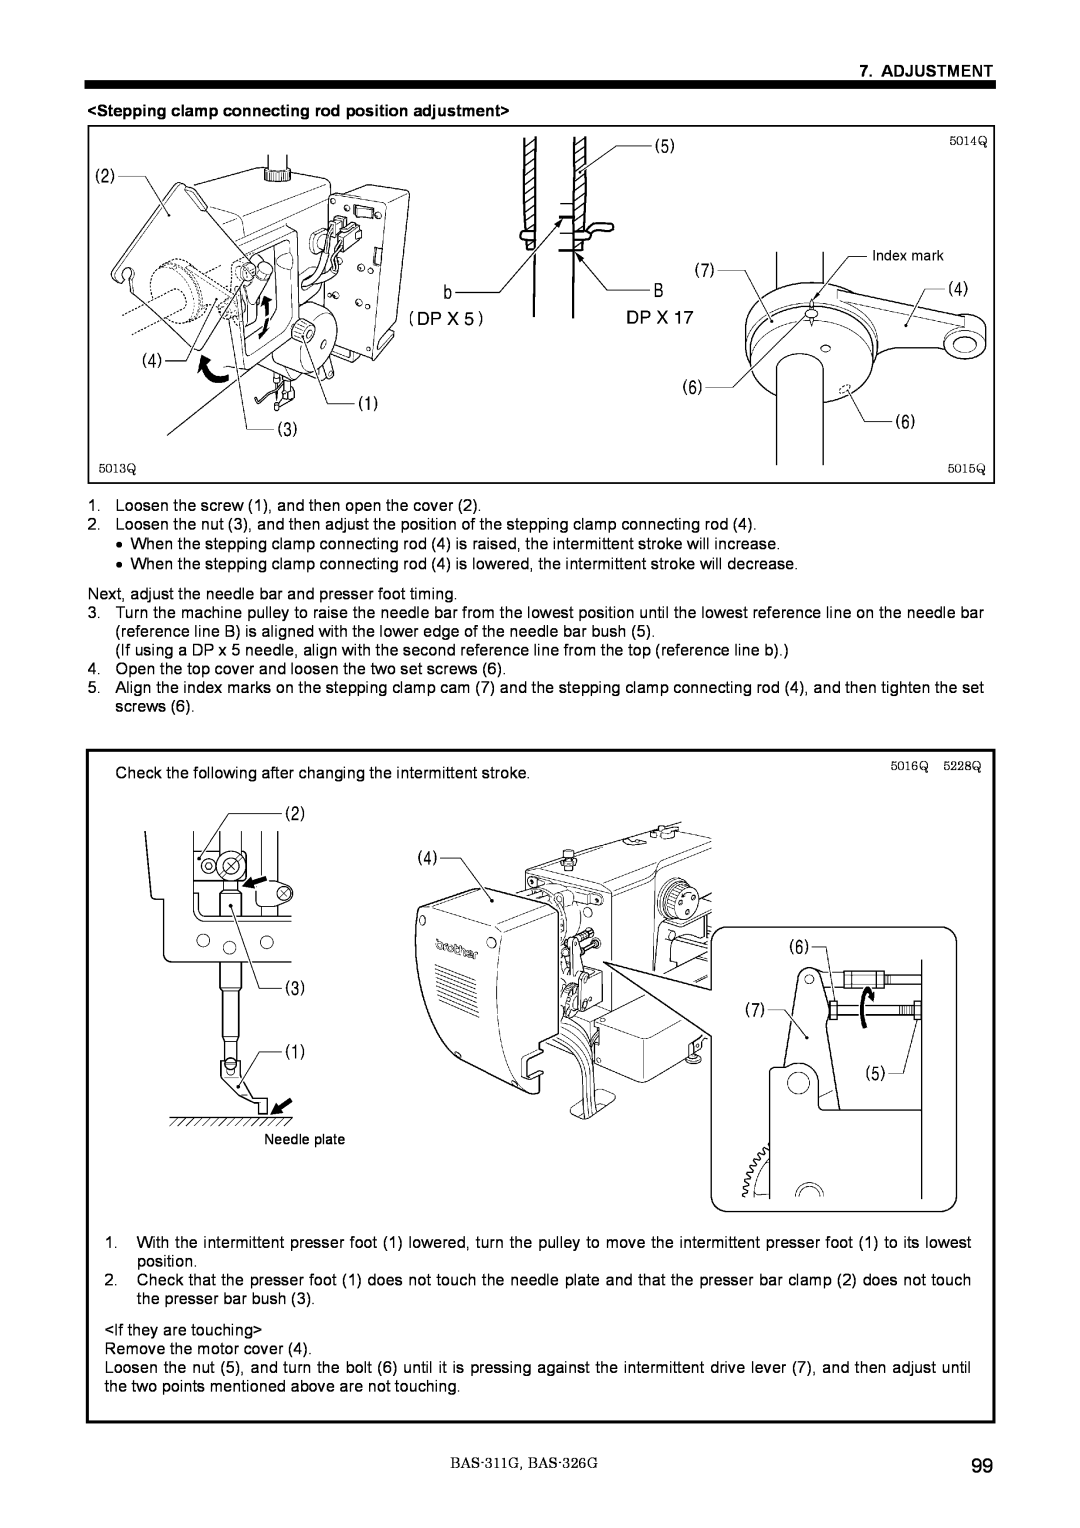 Brother BAS-311G service manual ADJUSTMENT Stepping clamp connecting rod position adjustment 